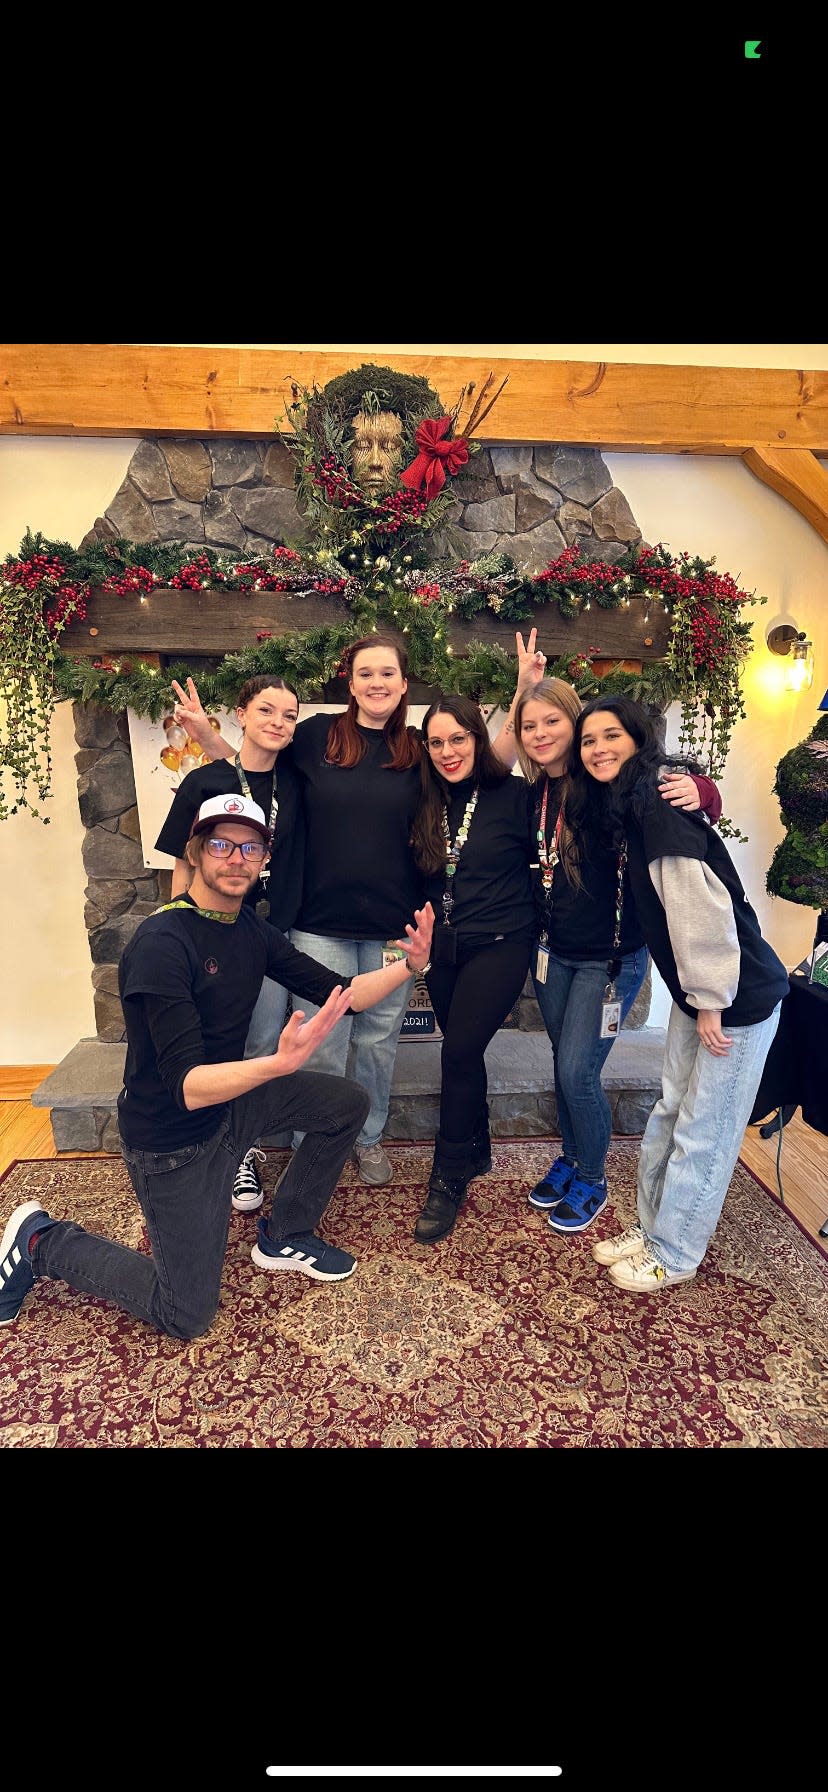 The staff of the Bud Barn in Winchendon as they celebrated one year in business. From left, Jameson Howard (kneeling), Hana Knowlton, Emily Mount, Melissa Murphy, Karlie Allen, and Mena Salame. They are selling gift cards for the holidays